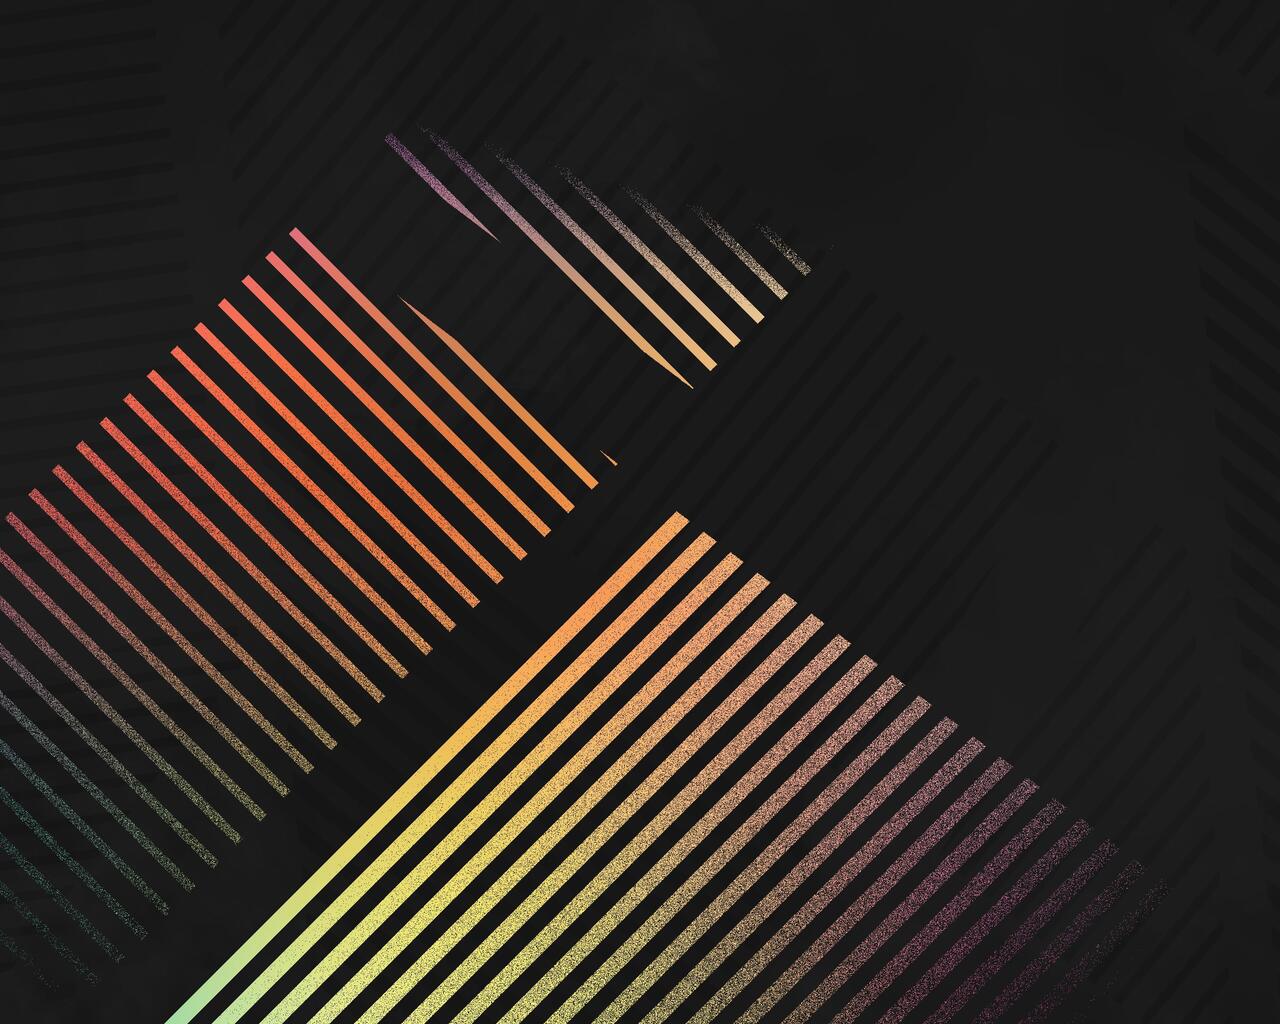 1280x1024 Abstract Lines Shapes 4k 1280x1024 Resolution HD 4k ...